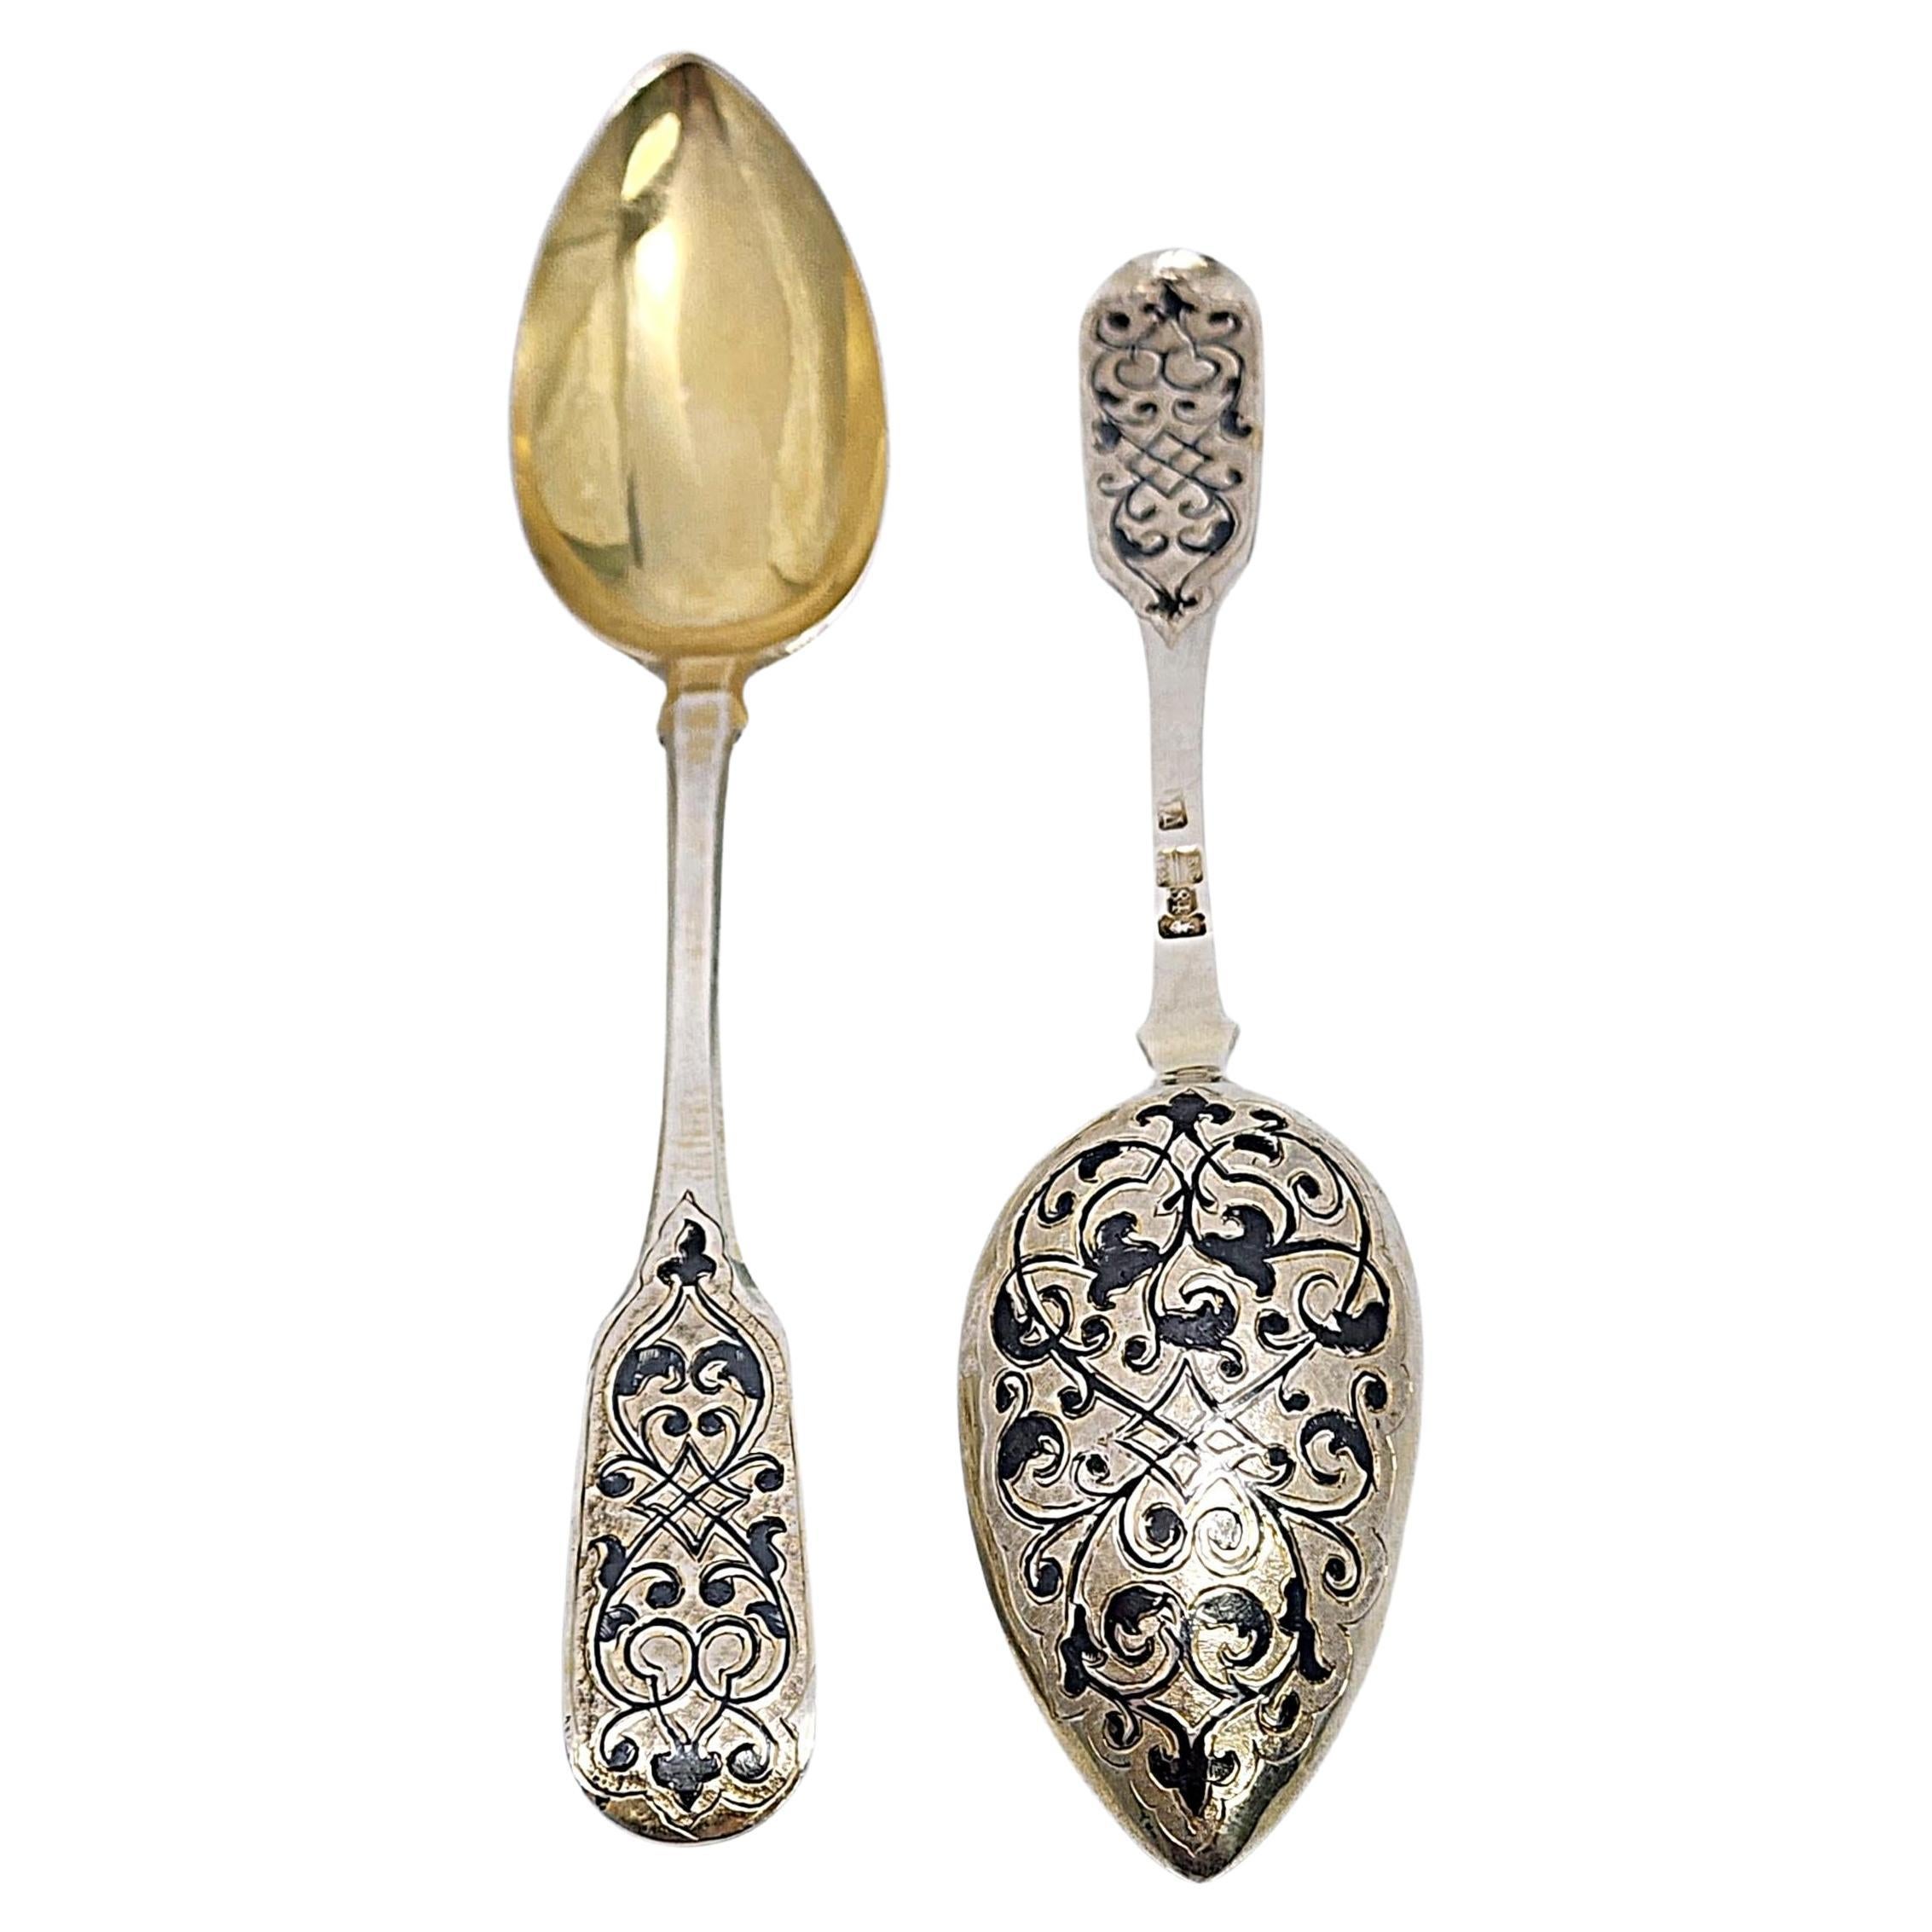 Set of 2 Russian 84 Zolotnik Imperial Silver Gold Wash and Enamel Spoons #16819